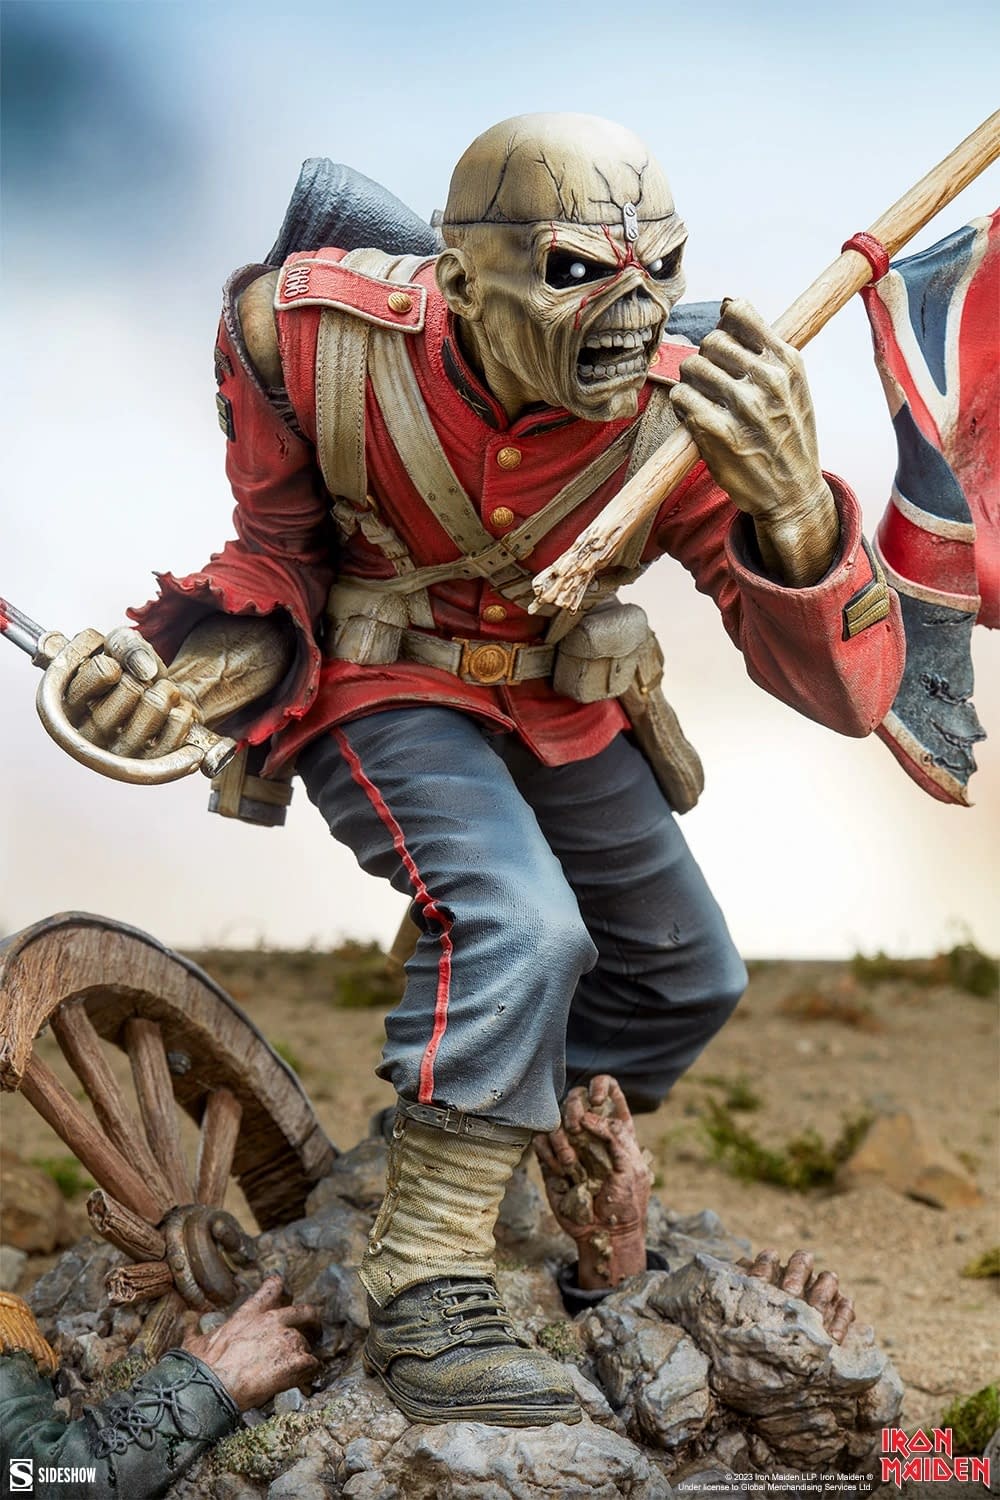 Rock On with Sideshow and Their Iron Maiden The Trooper Eddie Statue 